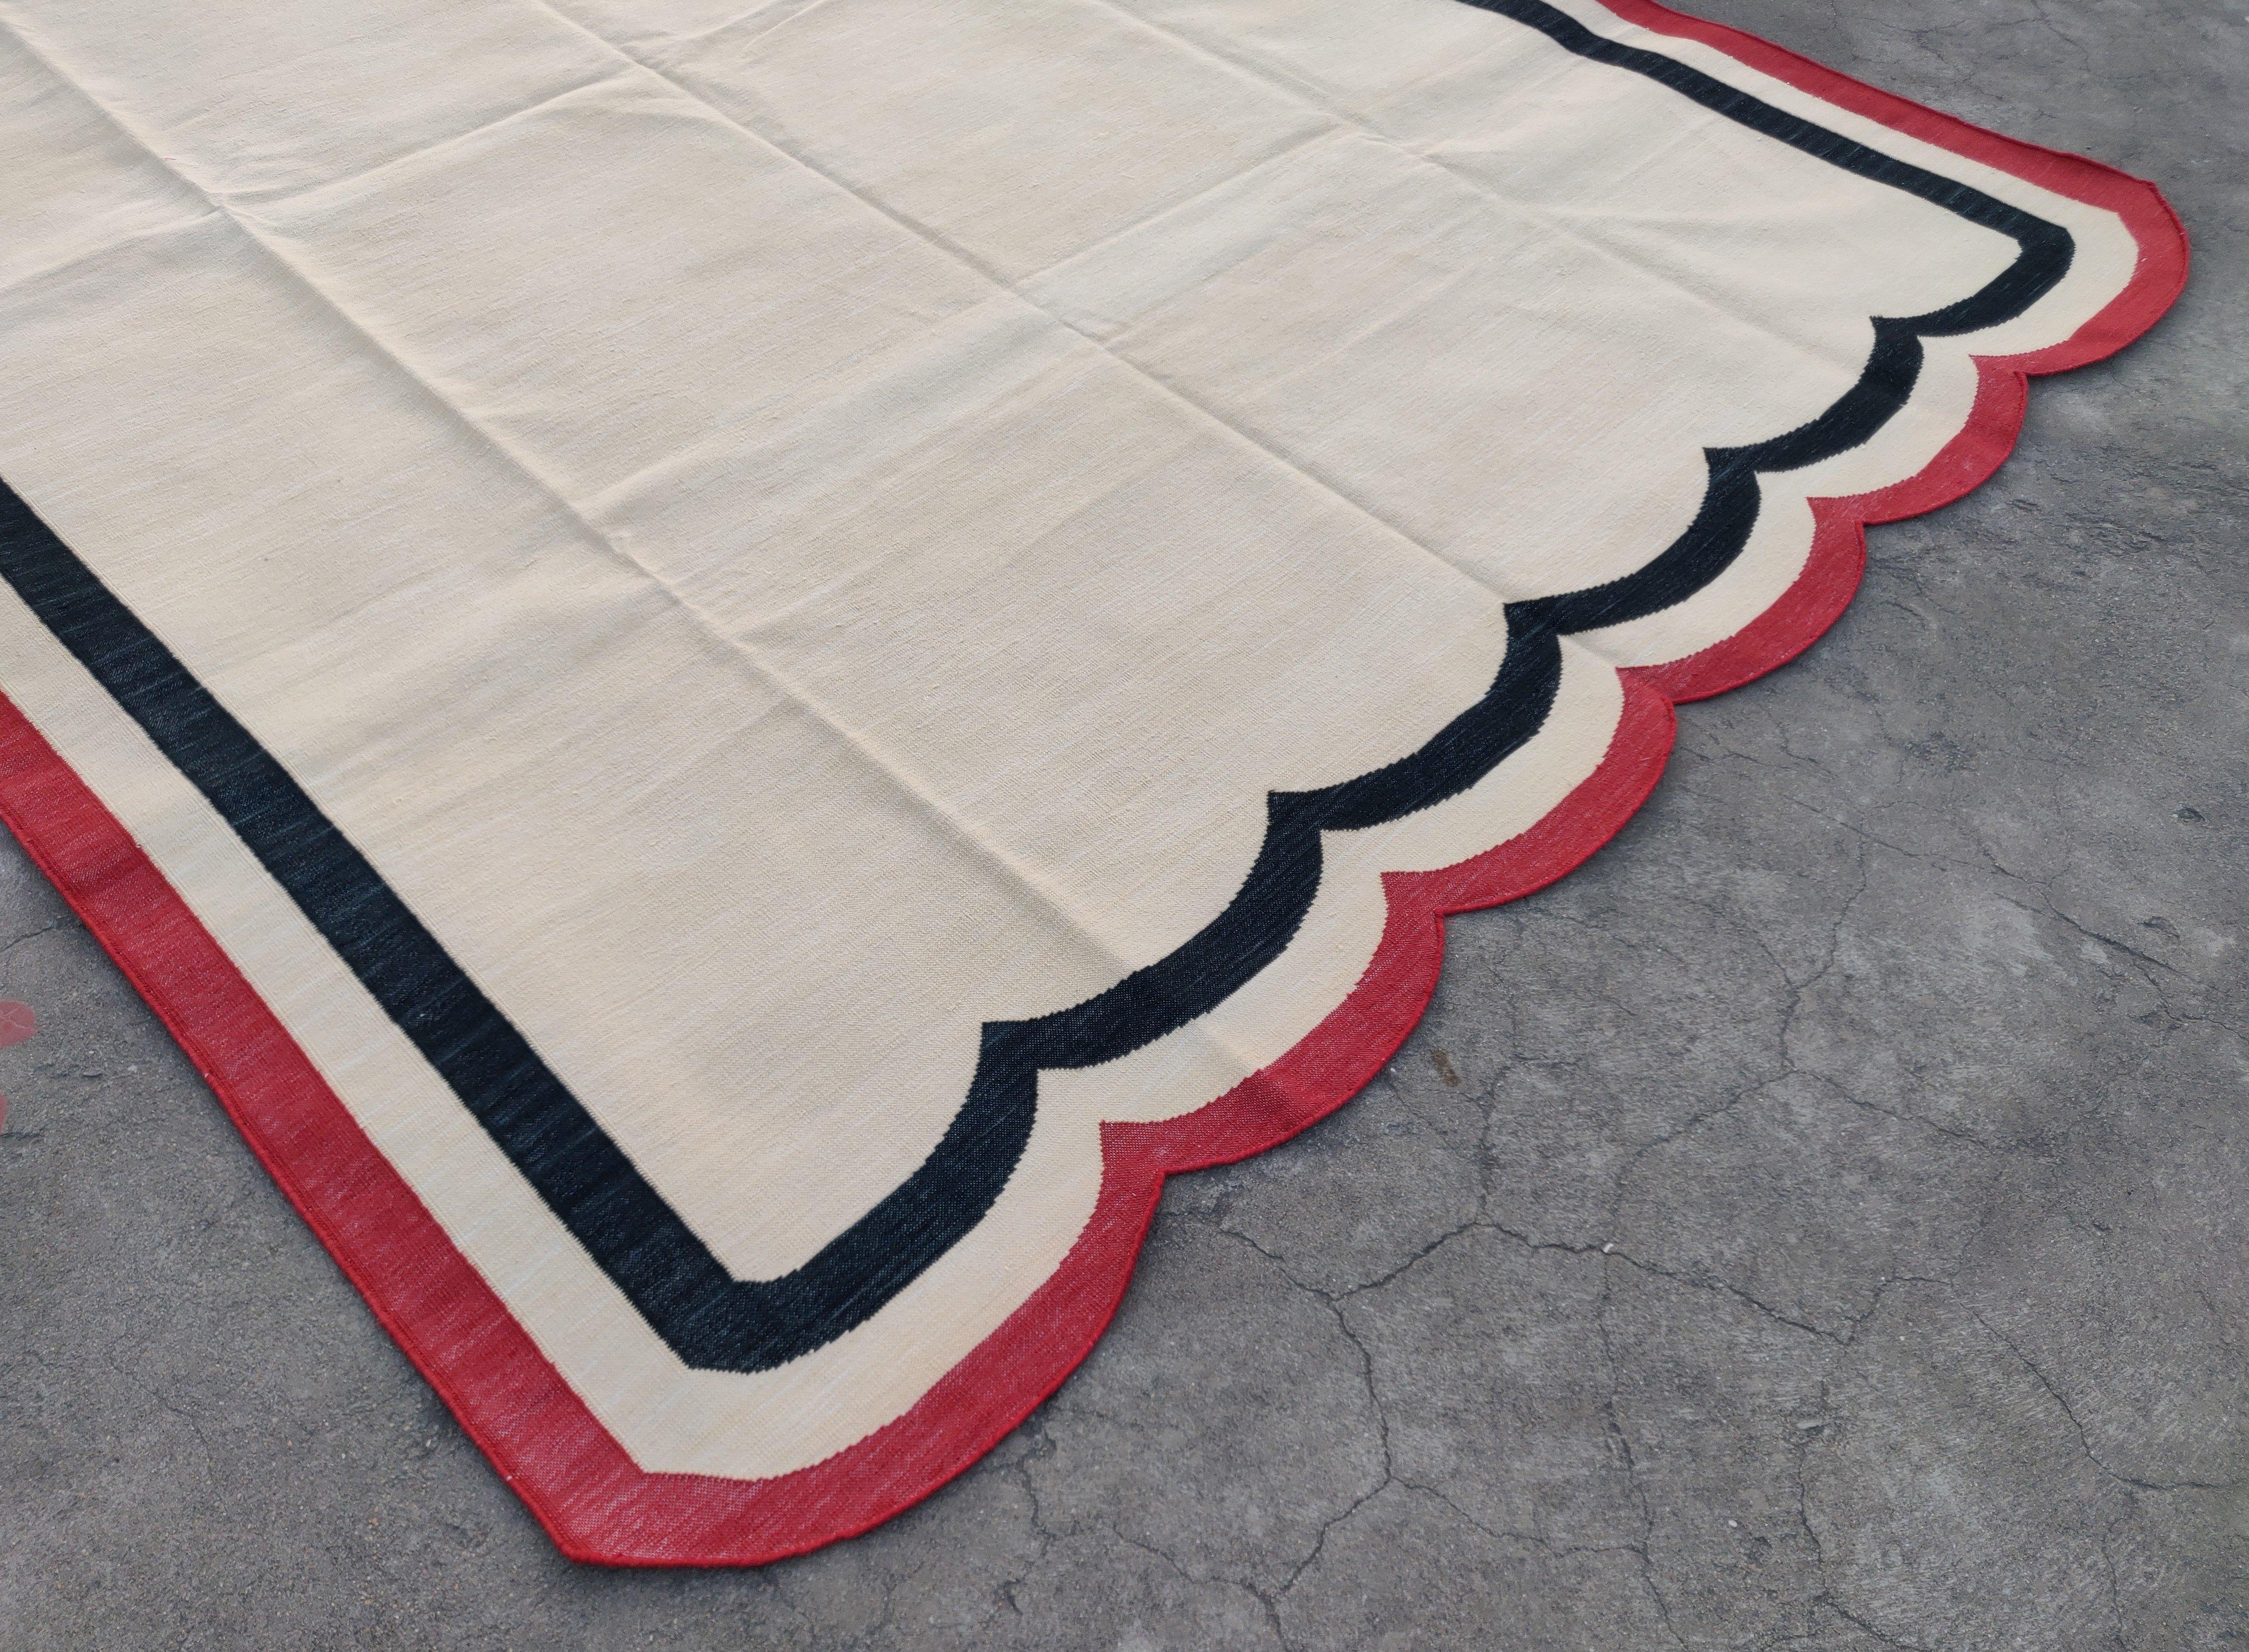 Hand-Woven Handmade Cotton Area Flat Weave Rug, 6x9 Cream And Red Scalloped Kilim Dhurrie For Sale